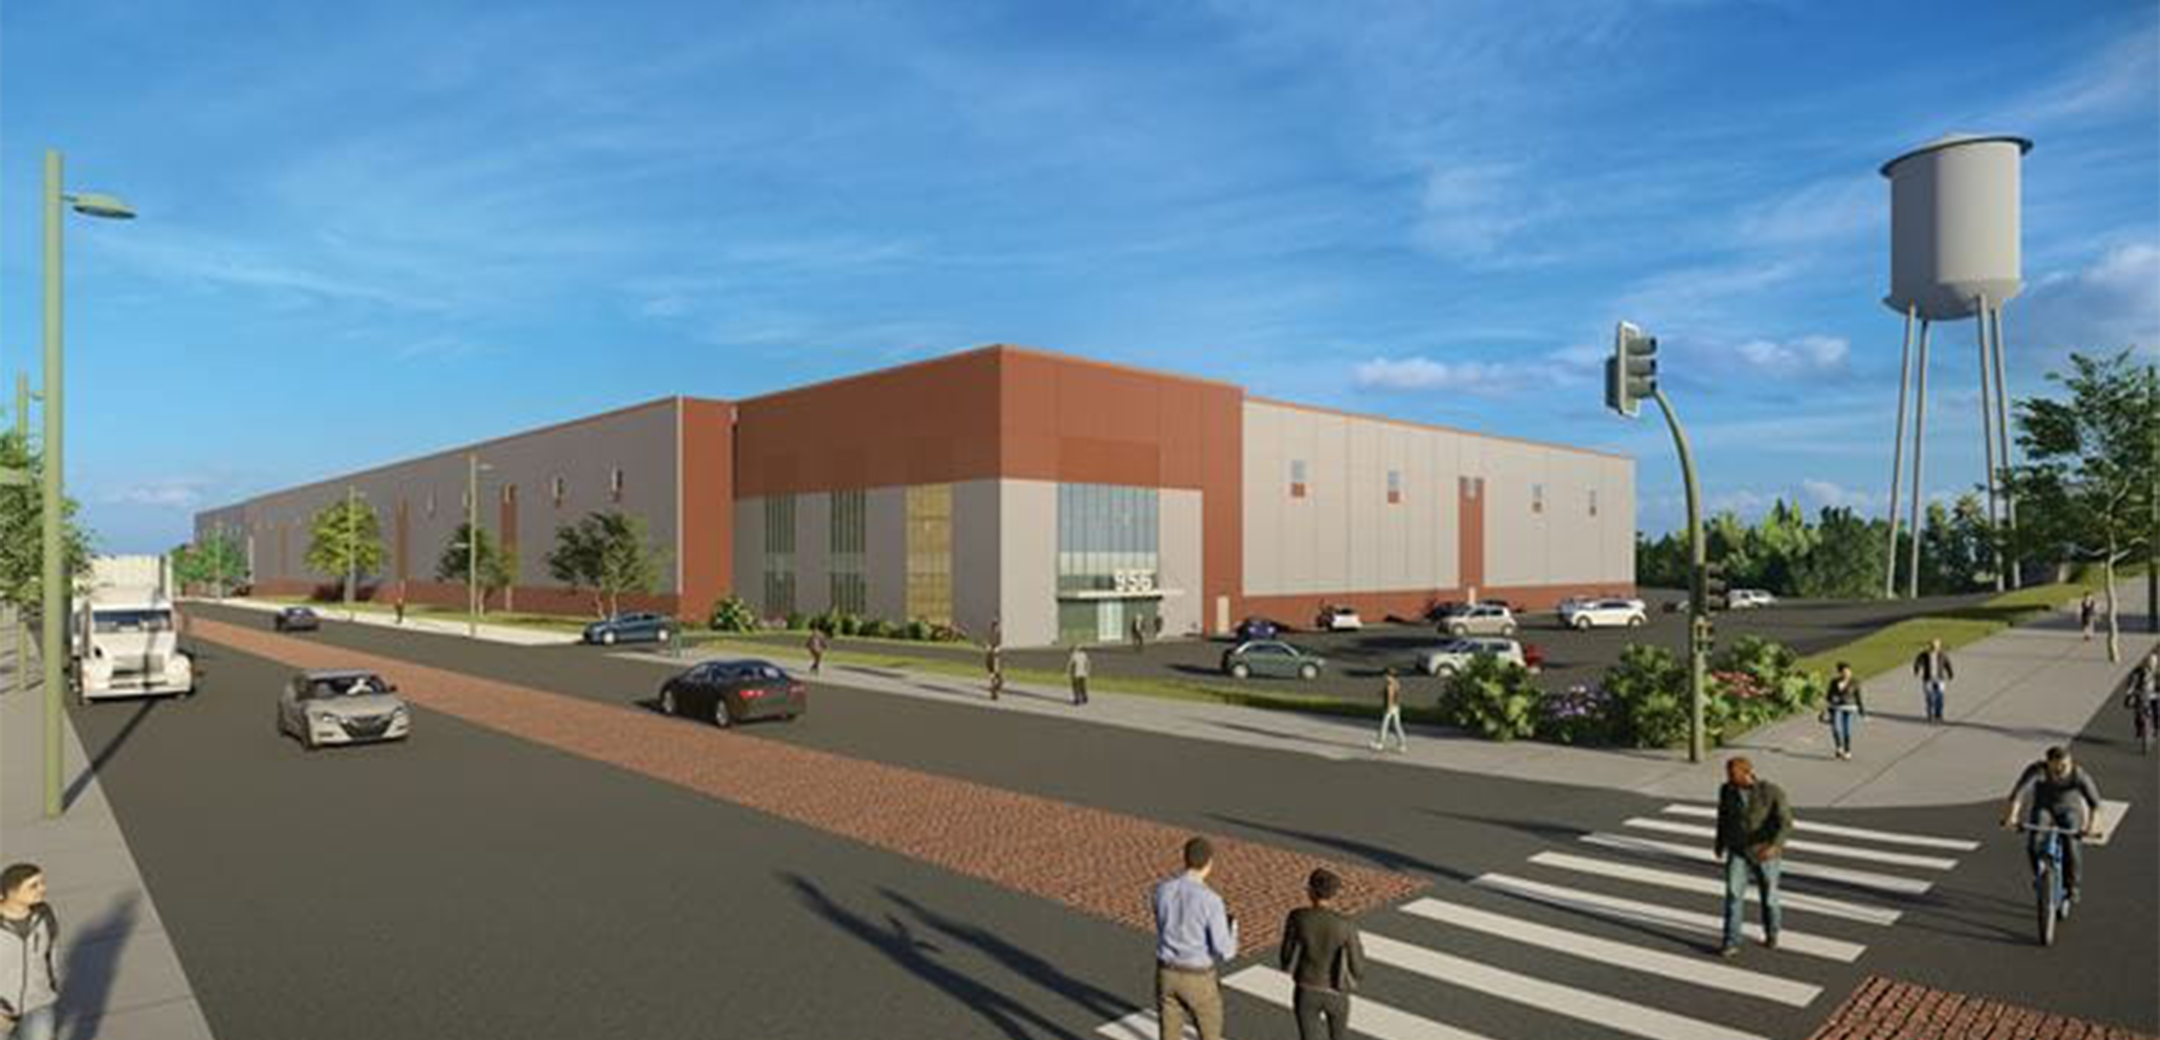 An exterior rendering of the 956 East Earie warehouse building, showcasing the length, large parking lot and main street with a crosswalk in the foreground.